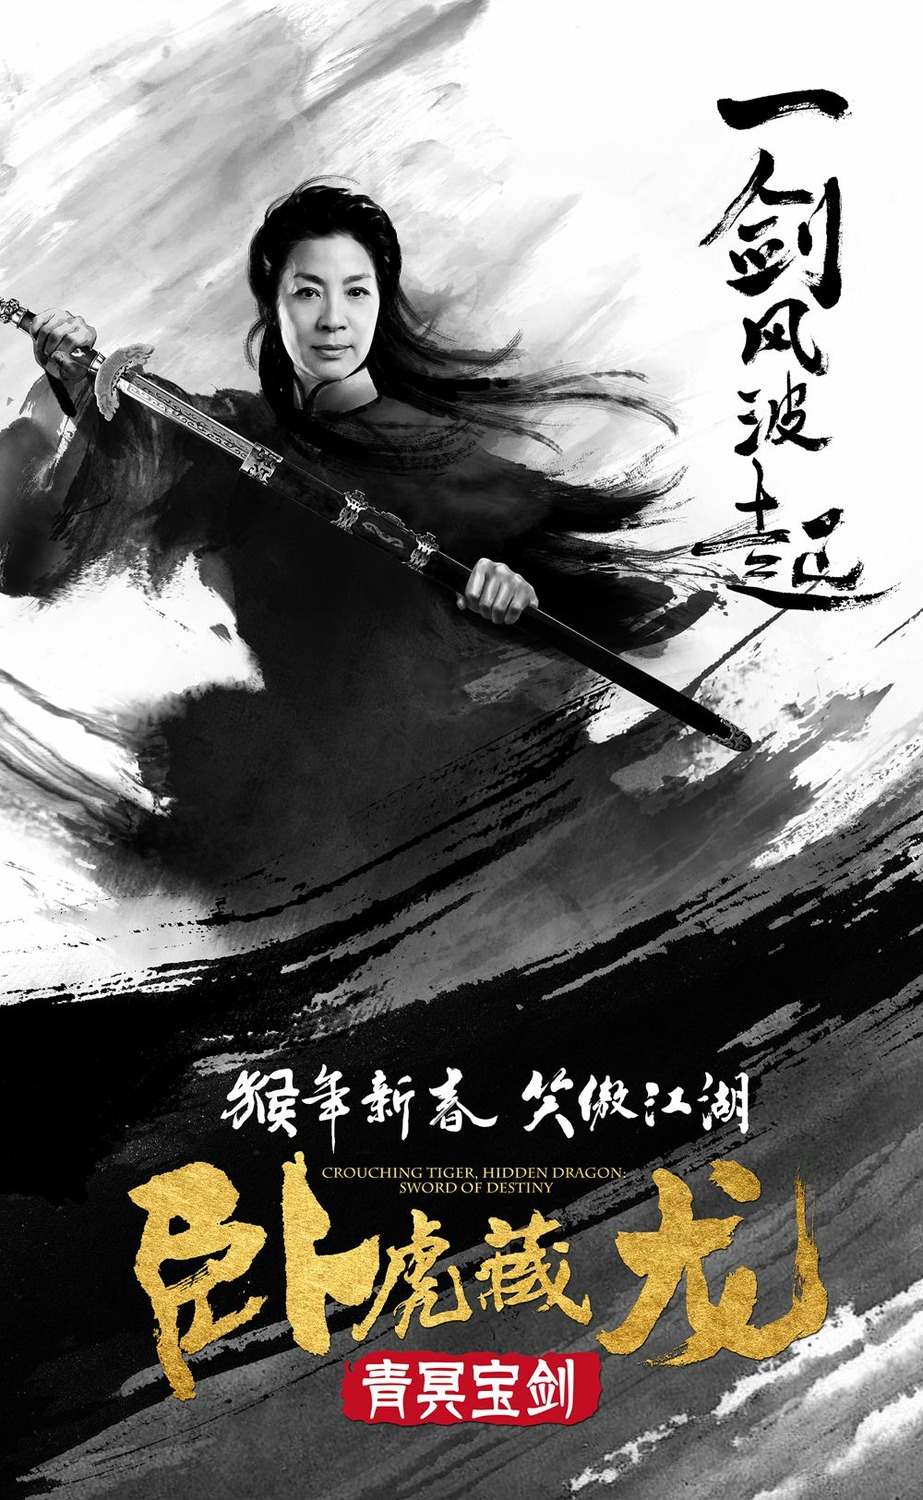 Extra Large Movie Poster Image for Crouching Tiger, Hidden Dragon: Sword of Destiny (#15 of 16)